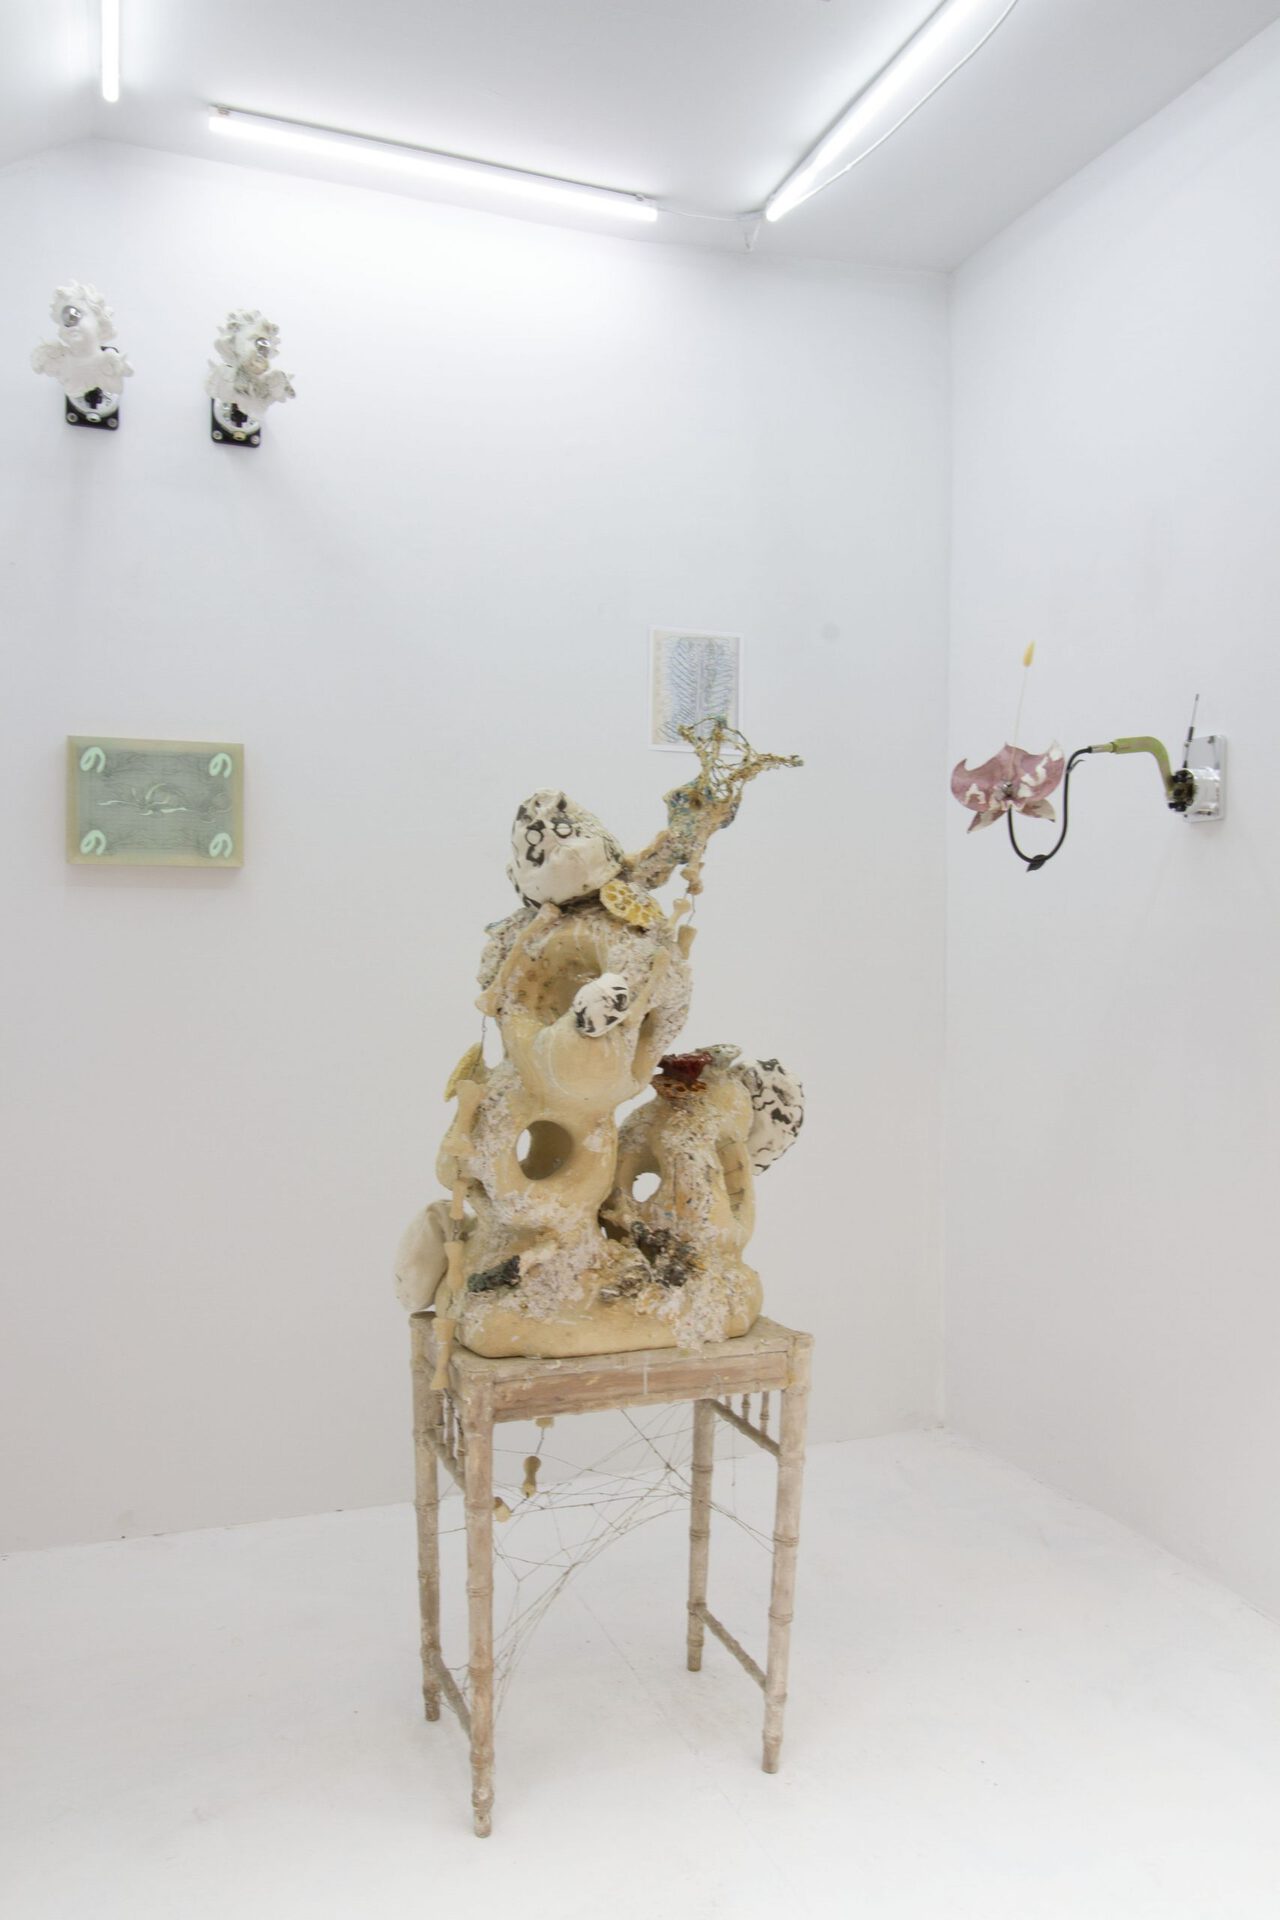 Installation view of Dissecting the Cyborgian Swamp Thang